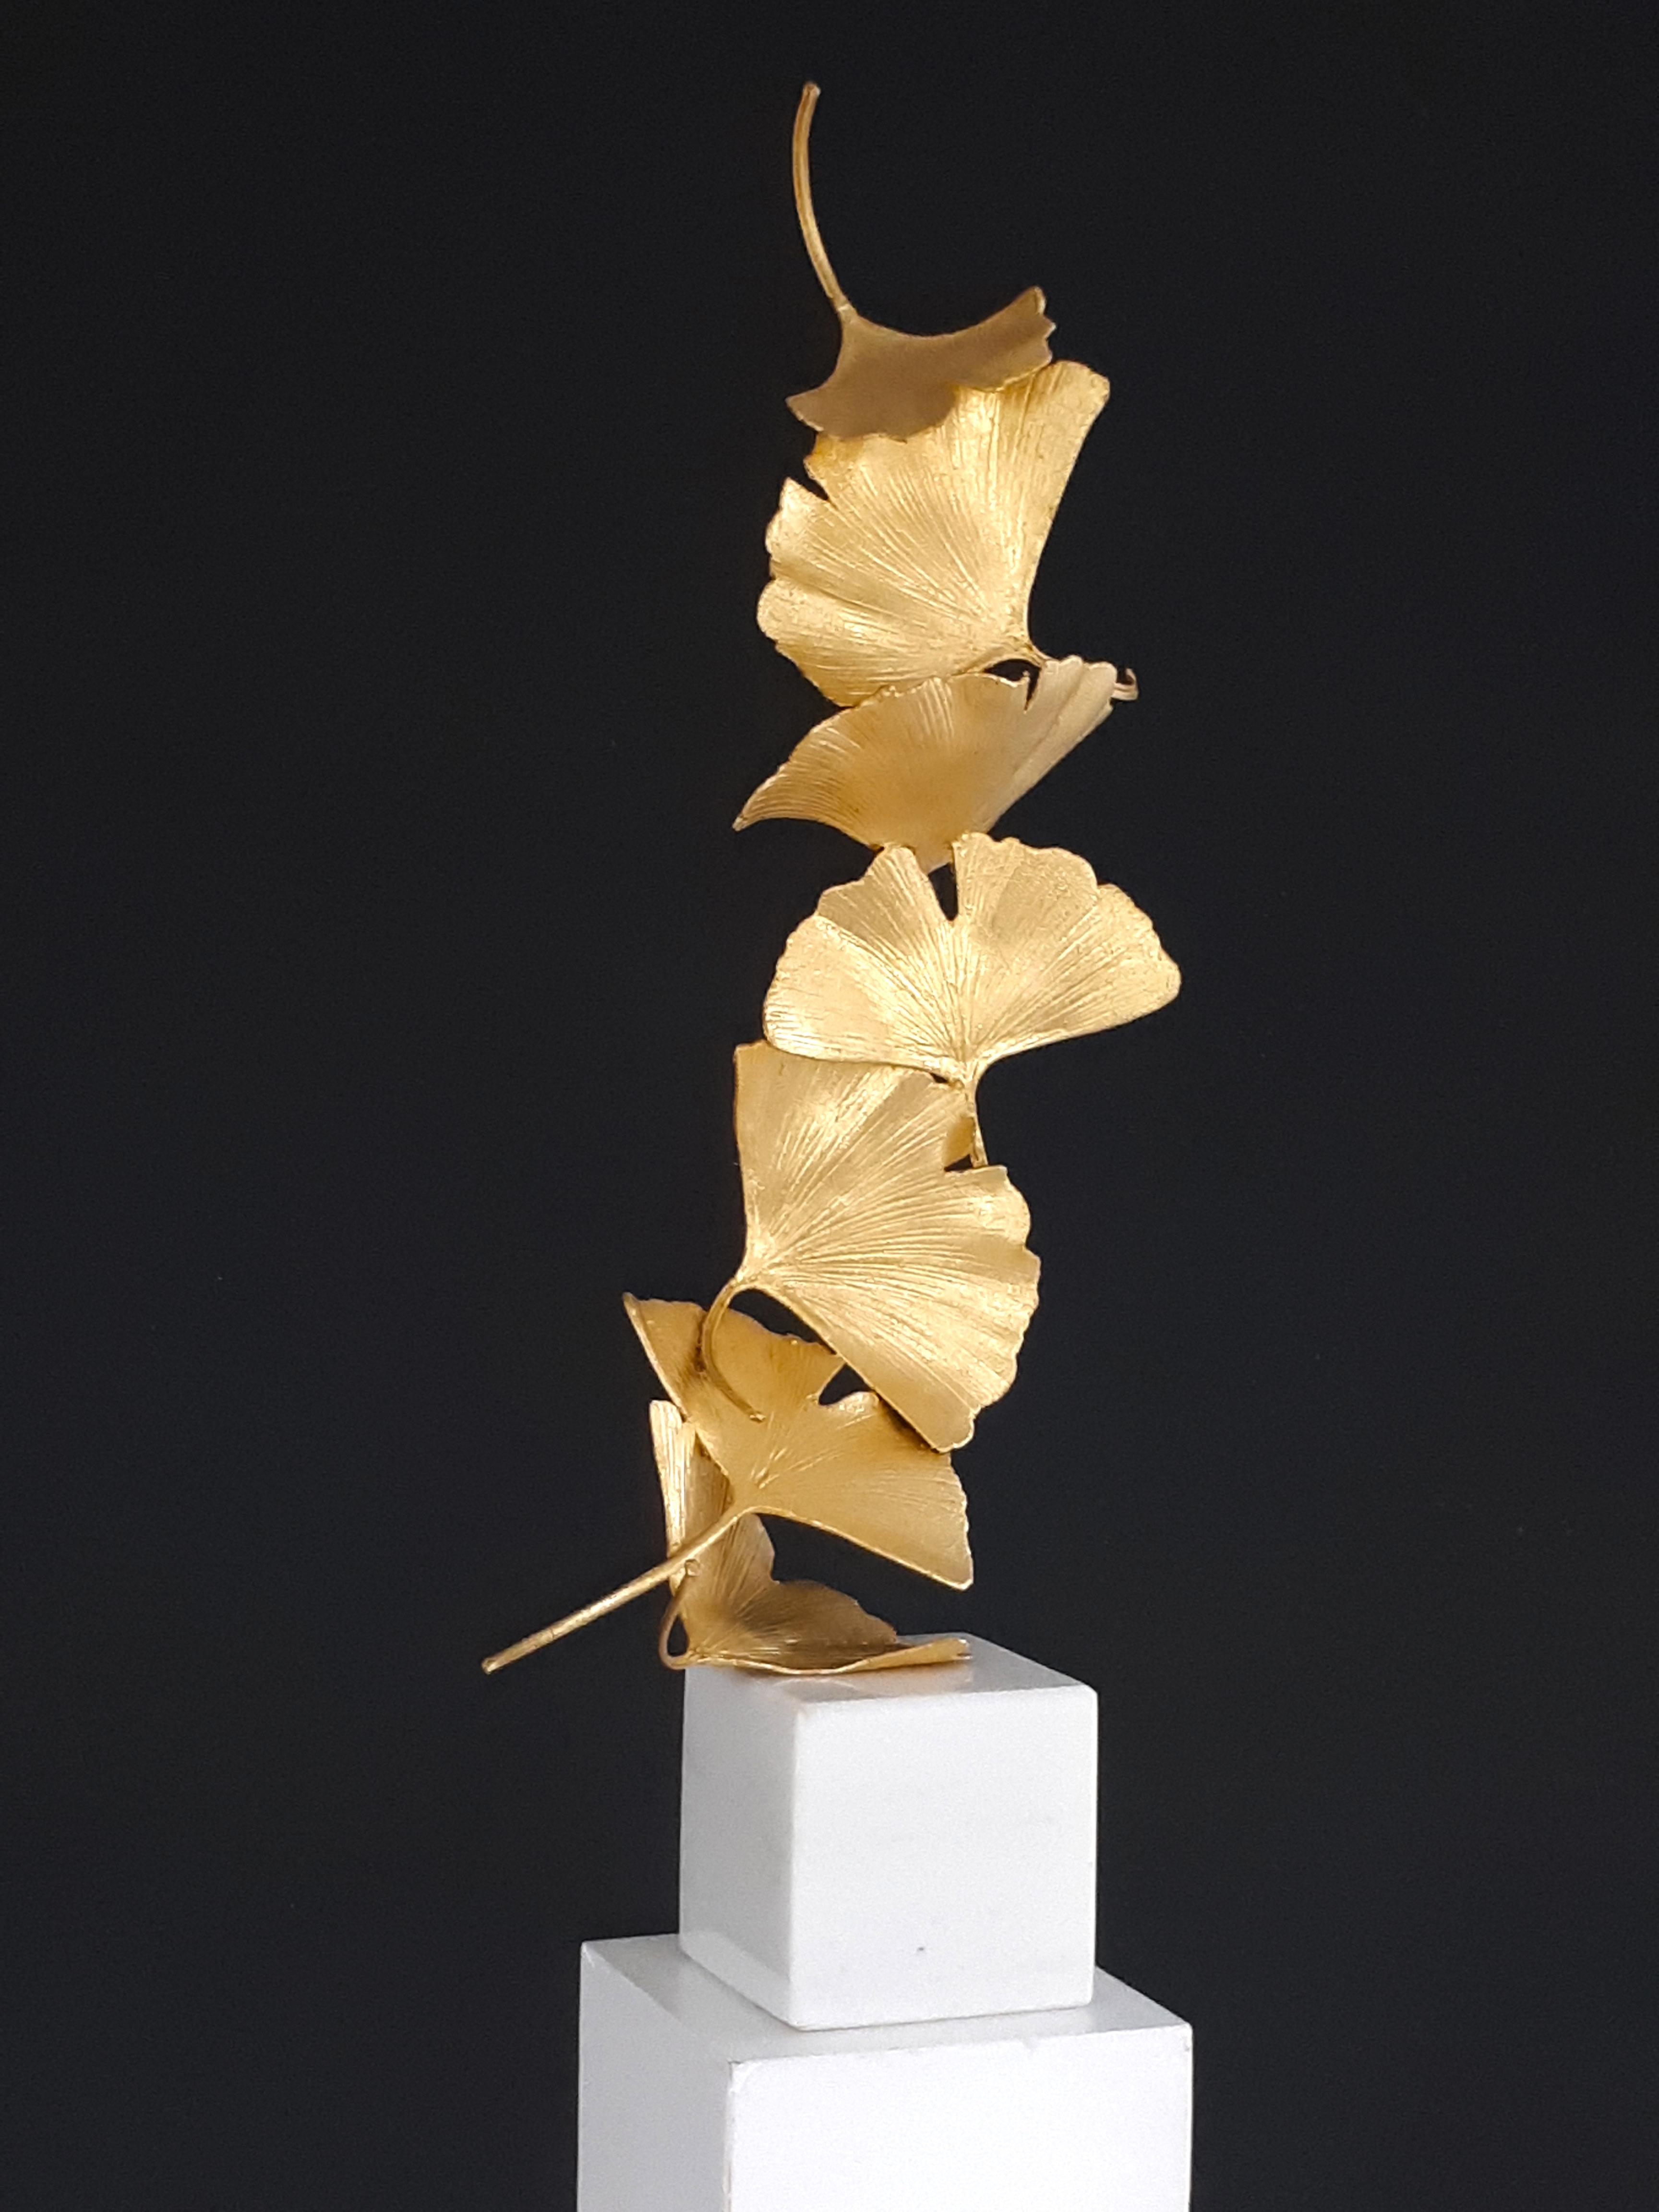 Kuno Vollet Abstract Sculpture - 7 Golden Gingko Leaves - Cast Brass golden sculpture on white marble base